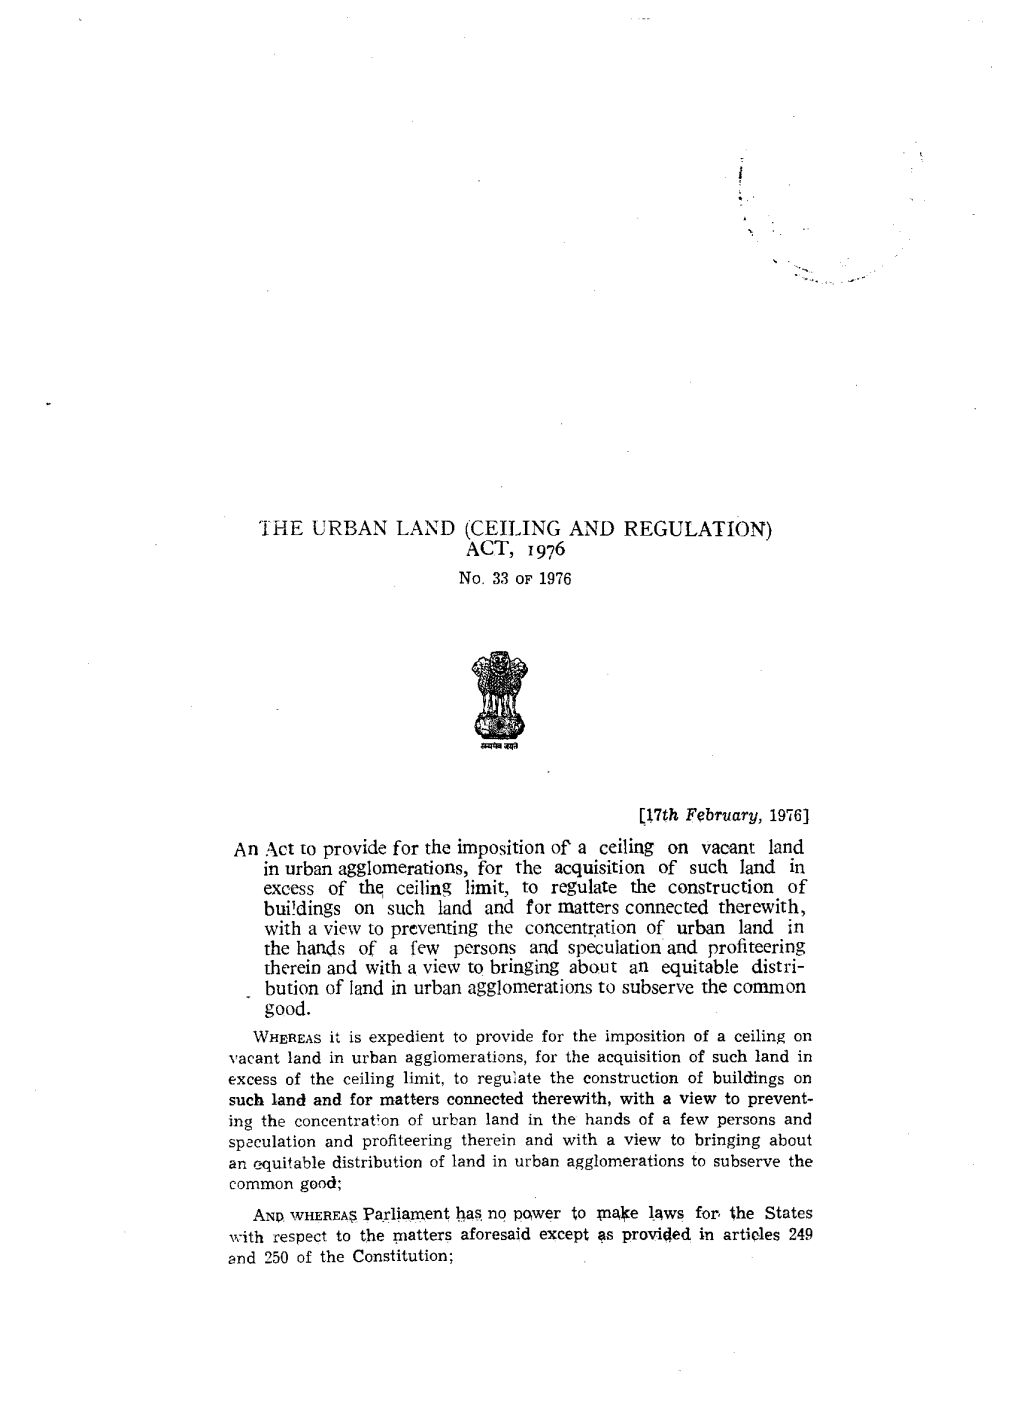 THE URBAN LAND (CEILING and REGULATION) ACT, 1976 No